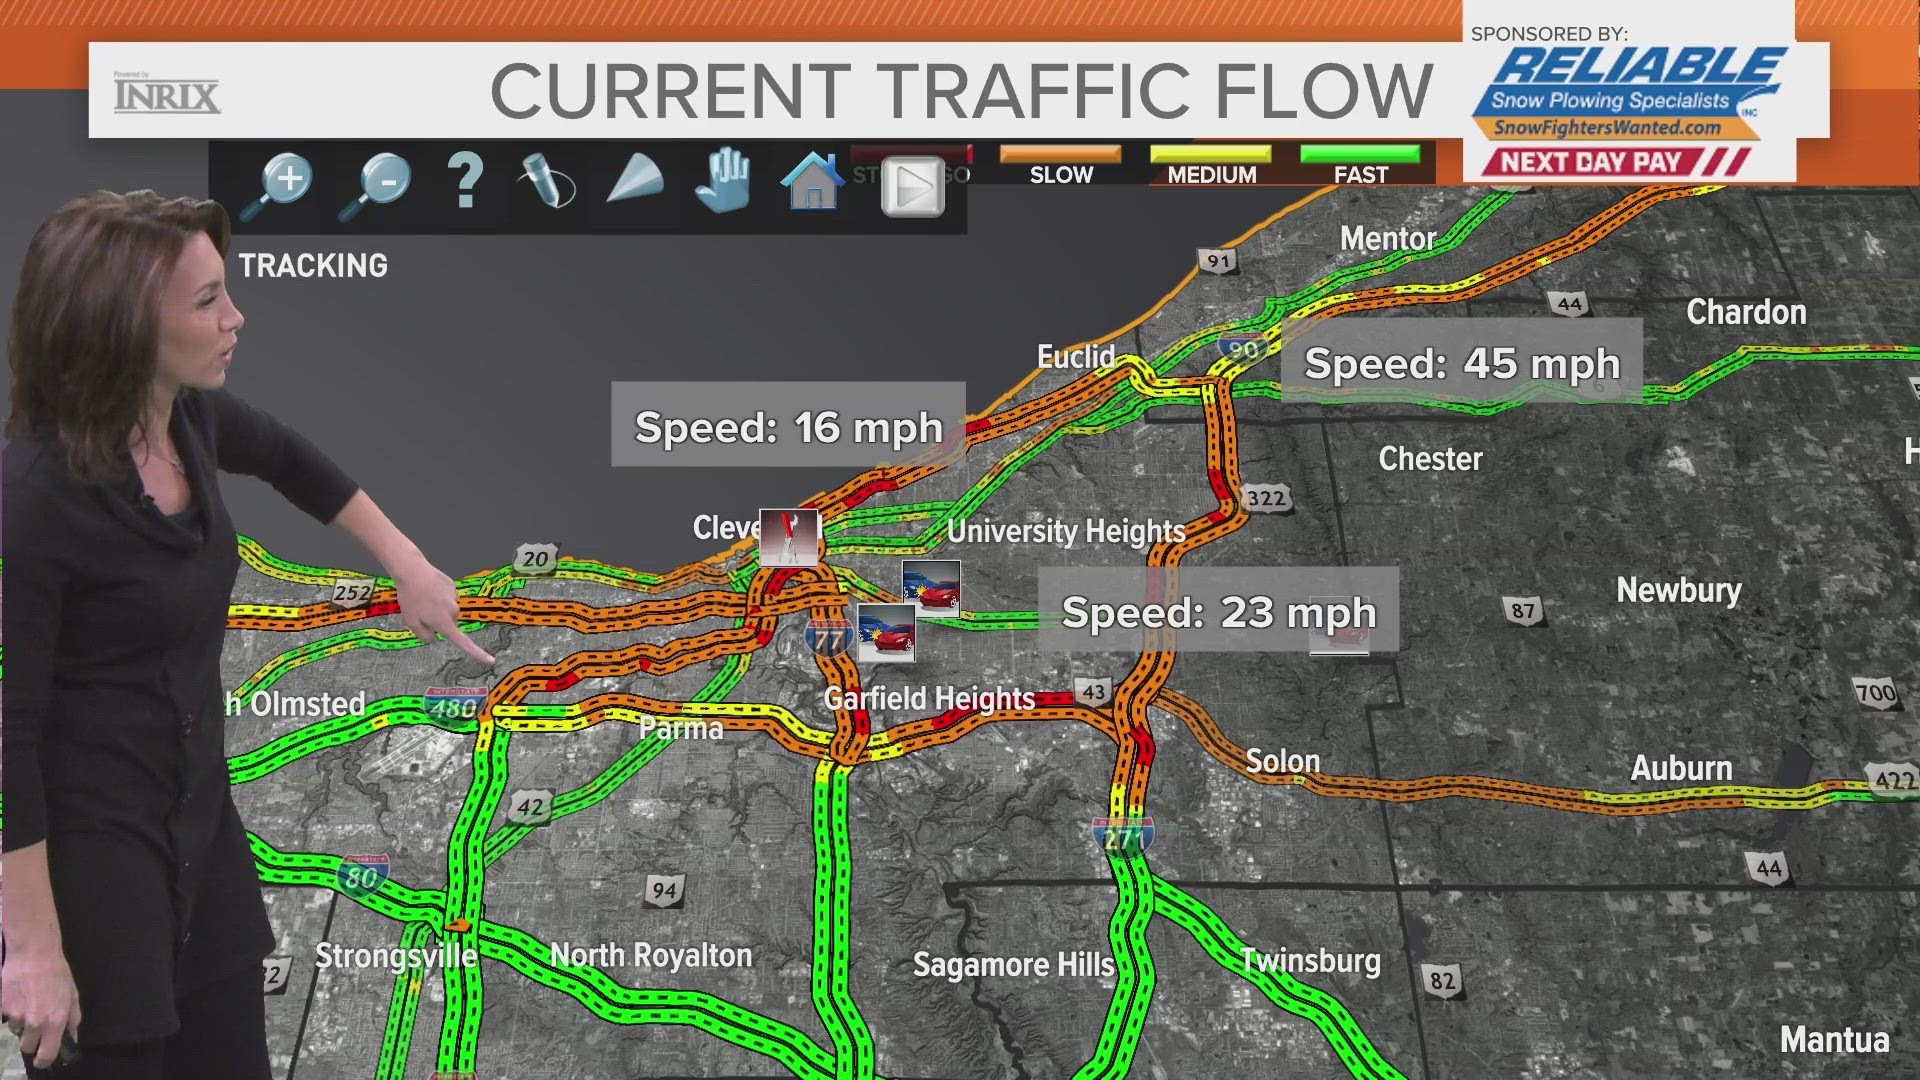 We have very slow traffic in the Cleveland area due to lake effect snow. Here's our updated team coverage at 6:30 a.m.